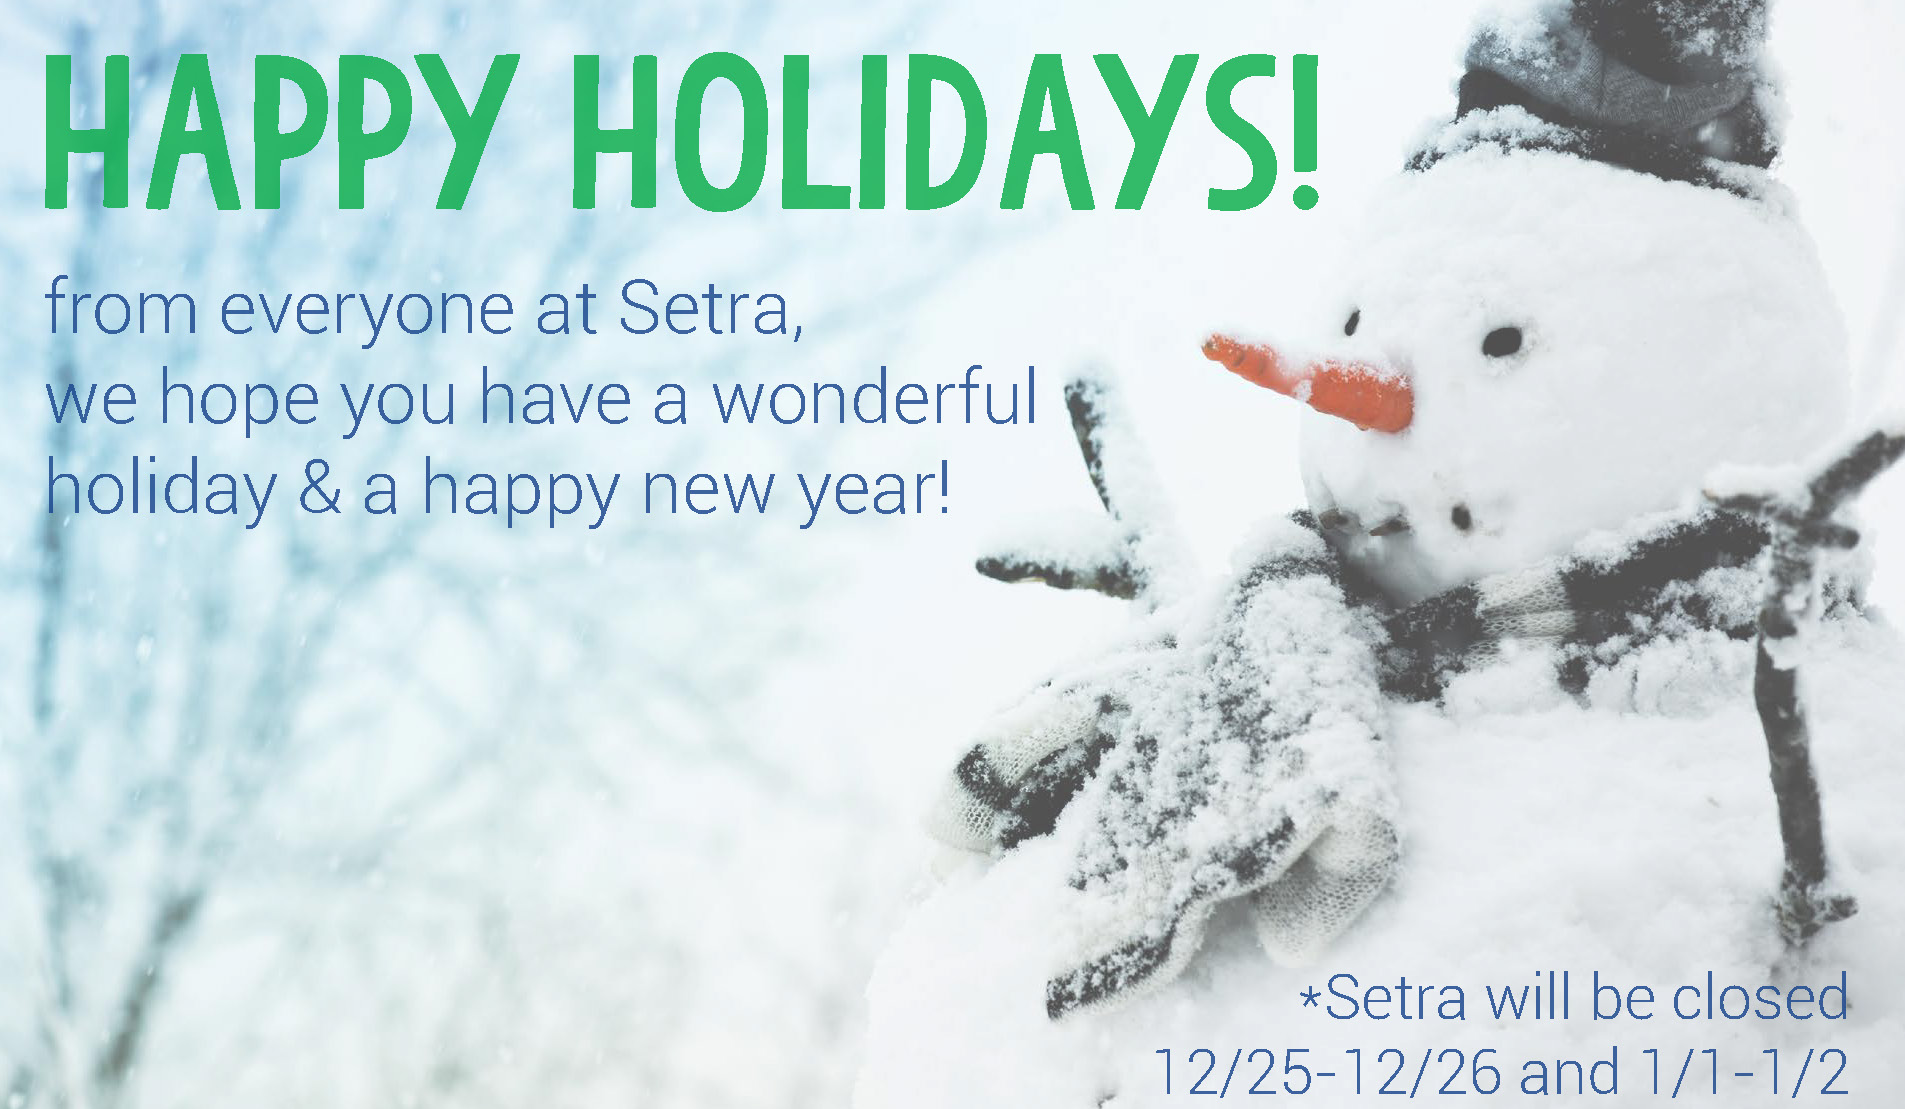 Happy Holidays from Setra Systems!